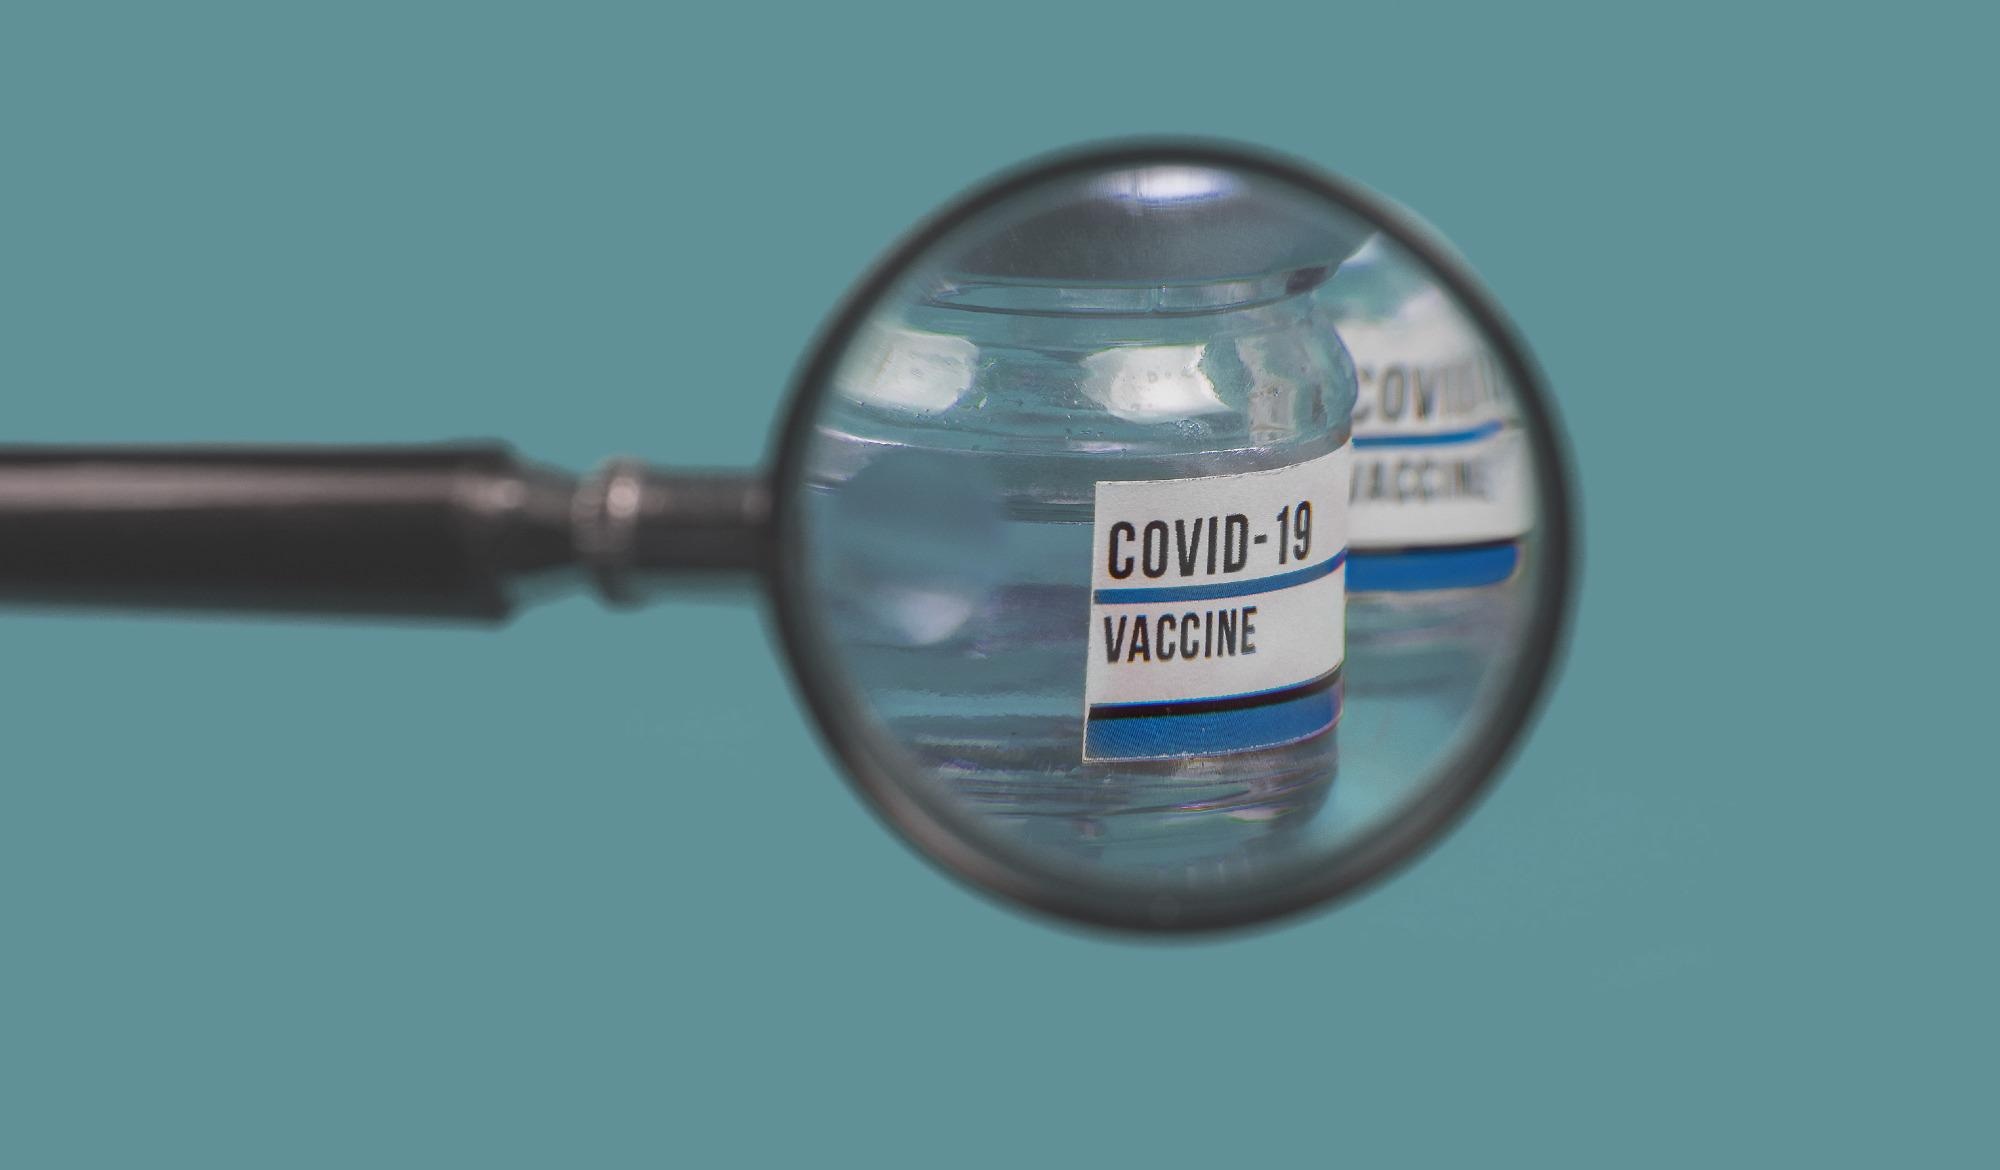 Study: Reporting Rates for VAERS Death Reports Following COVID-19 Vaccination, December 14, 2020-November 17, 2021. Image Credit: Anze Furlan / Shutterstock